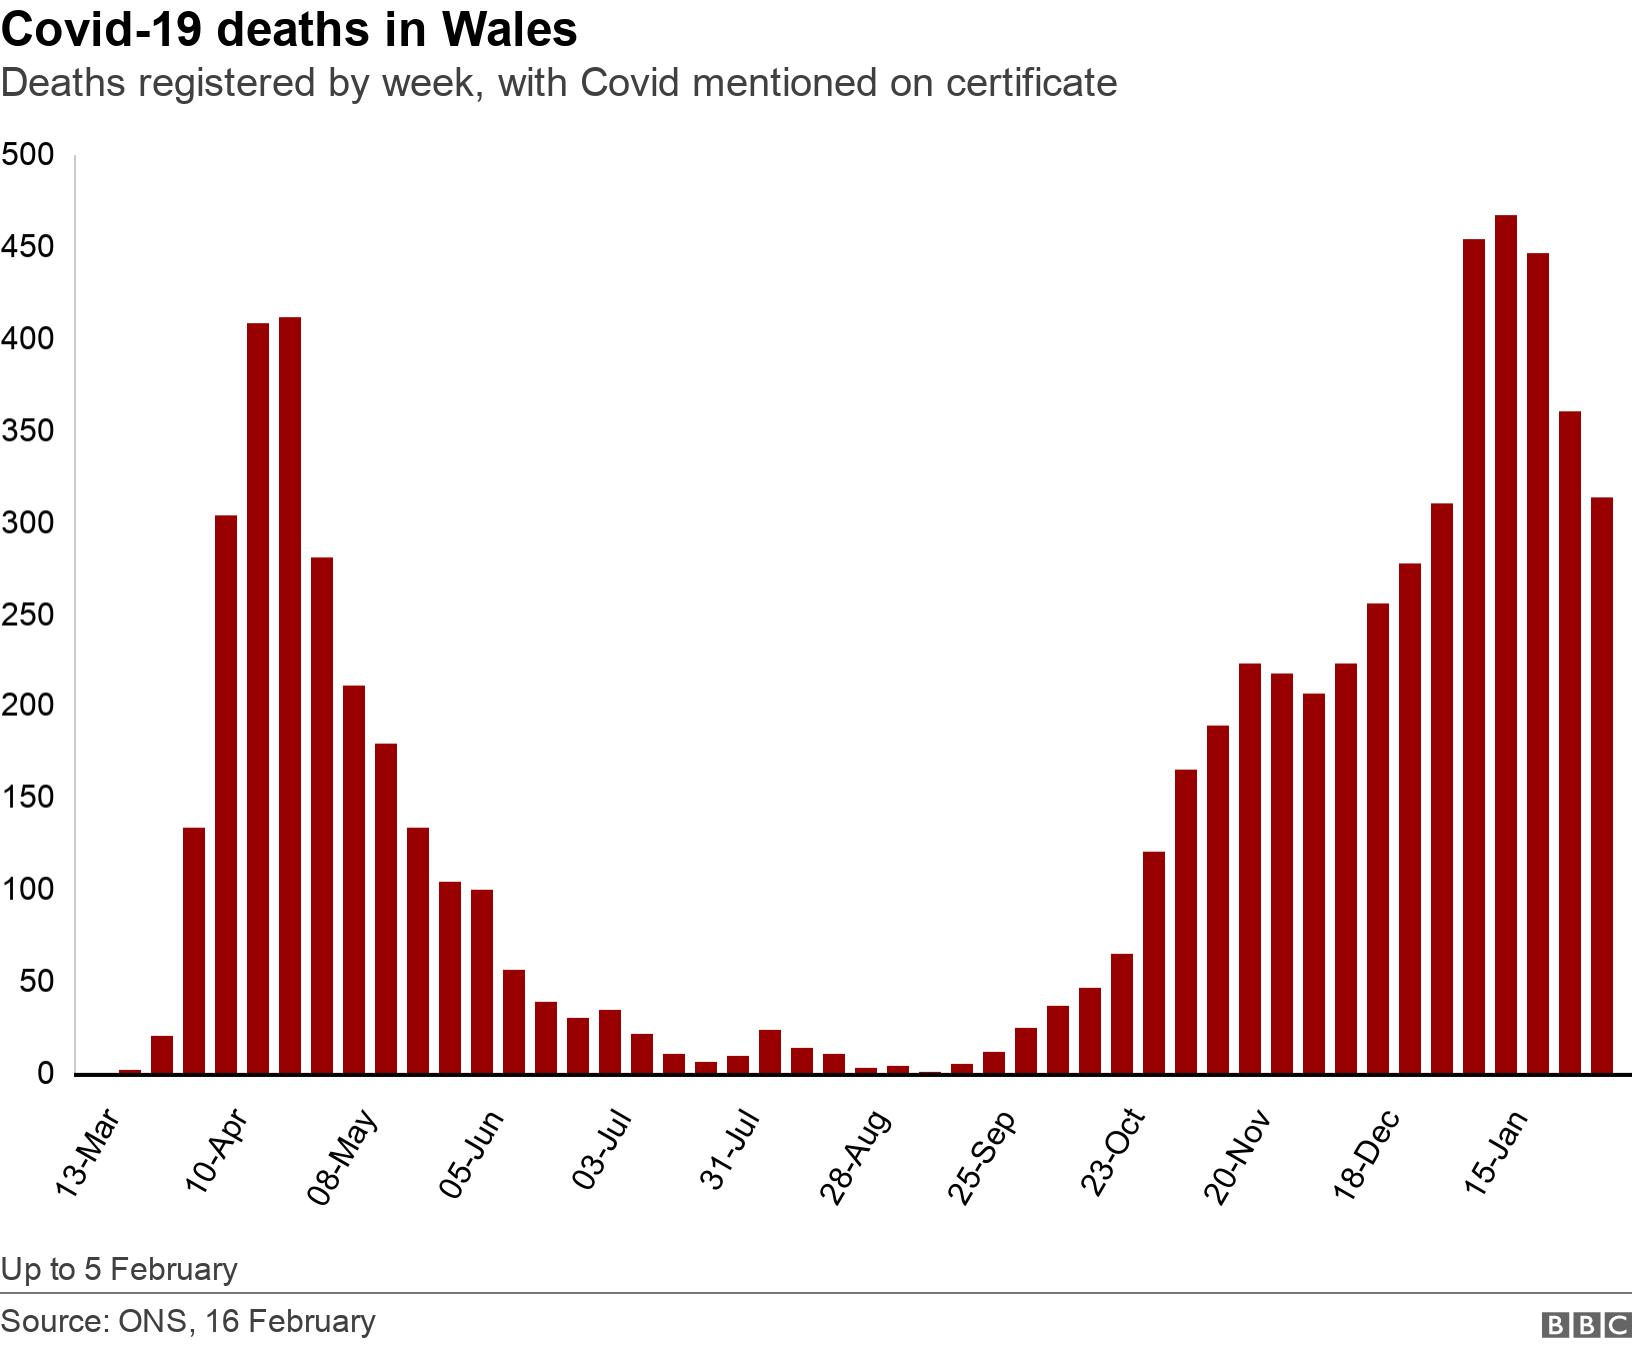 Covid-19 deaths in Wales. Deaths registered by week, with Covid mentioned on certificate.  Up to 5 February.